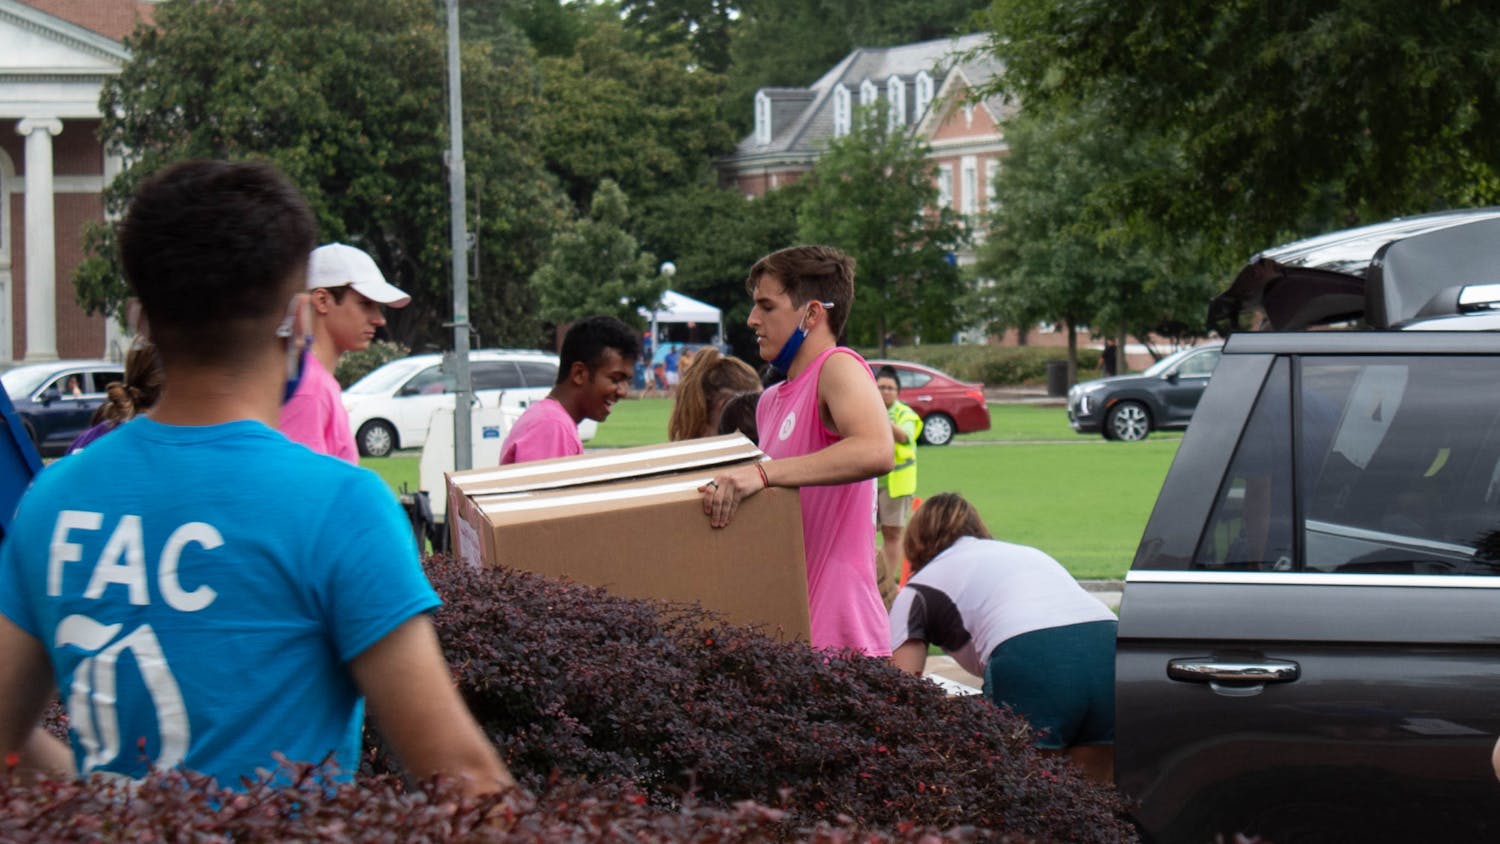 First-year advisory counselors move students' belongings into Giles dorm on Tuesday, move-in day for the Class of 2025.